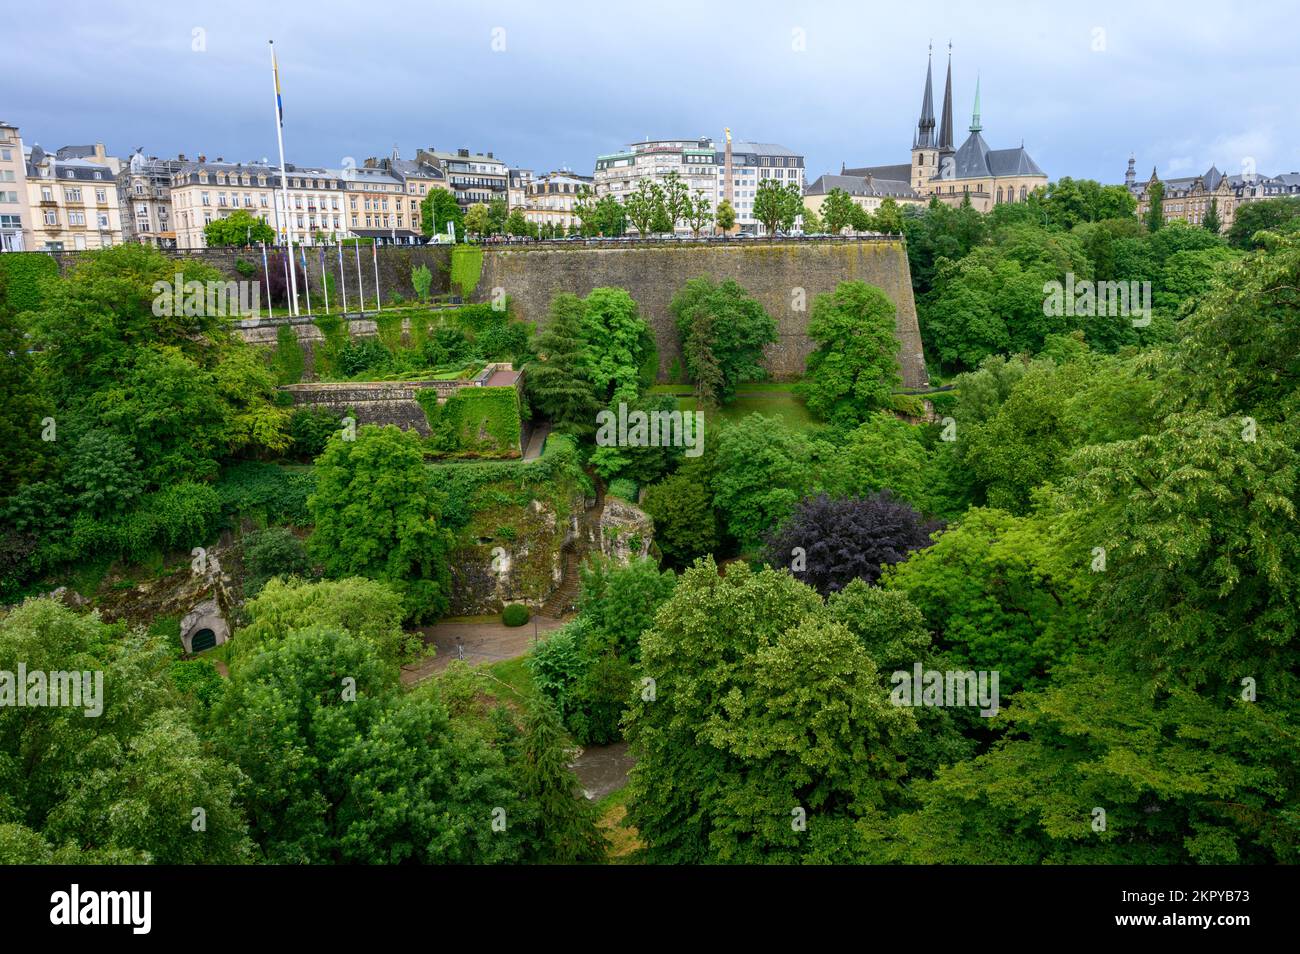 A view of the city of Luxembourg with the Pétrusse Parks, the Notre-Dame Cathedral and Gëlle Fra (Monument of Remembrance). Stock Photo